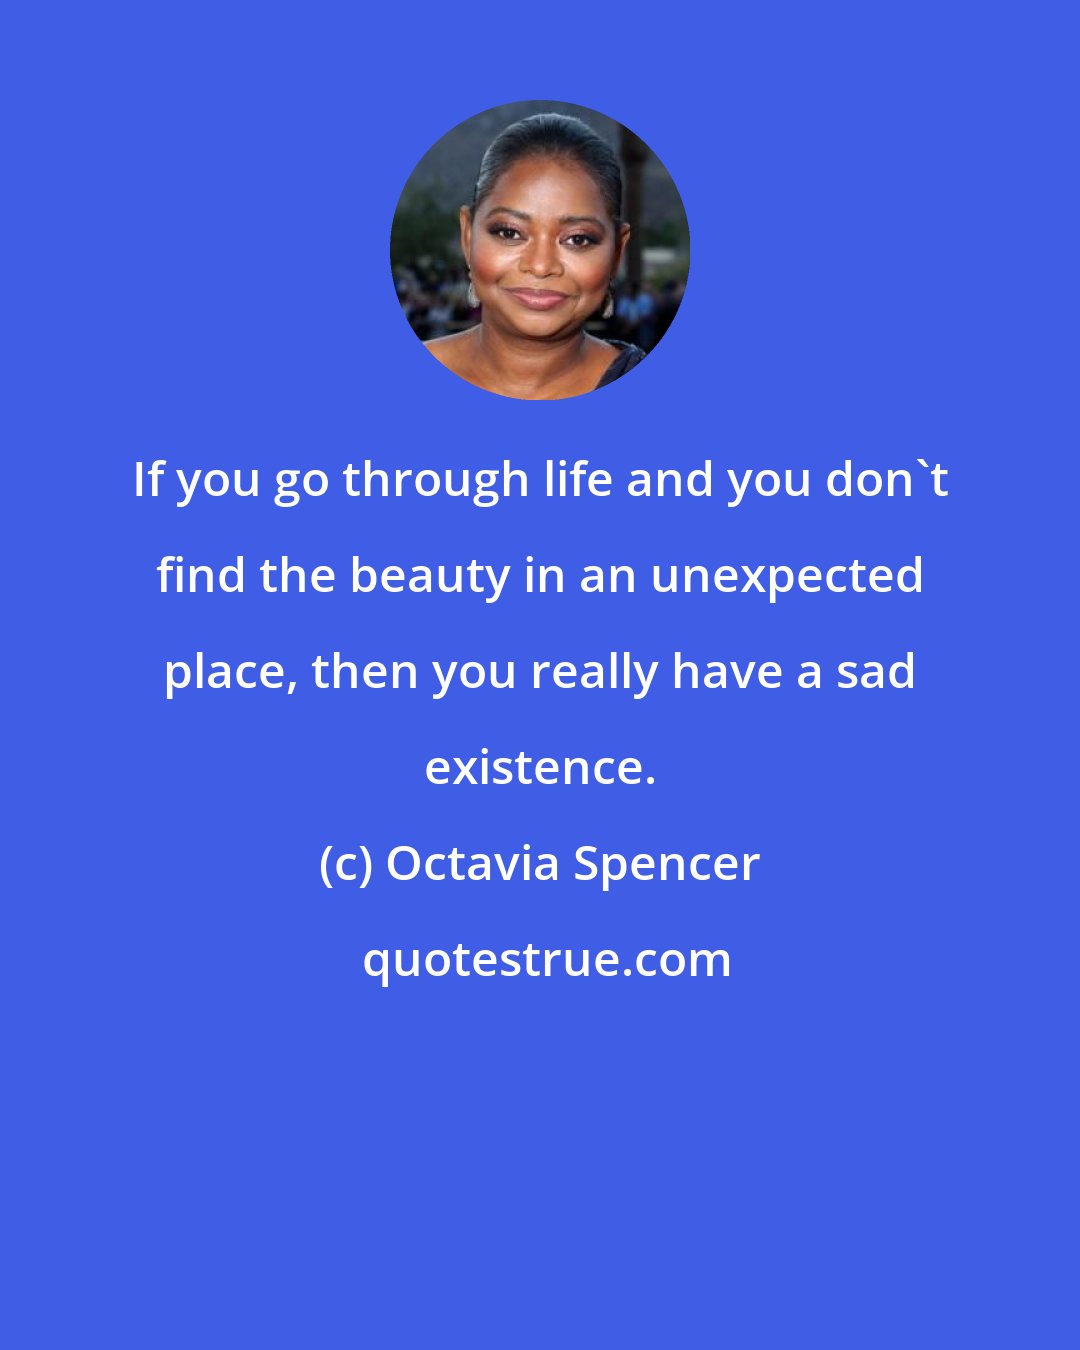 Octavia Spencer: If you go through life and you don't find the beauty in an unexpected place, then you really have a sad existence.